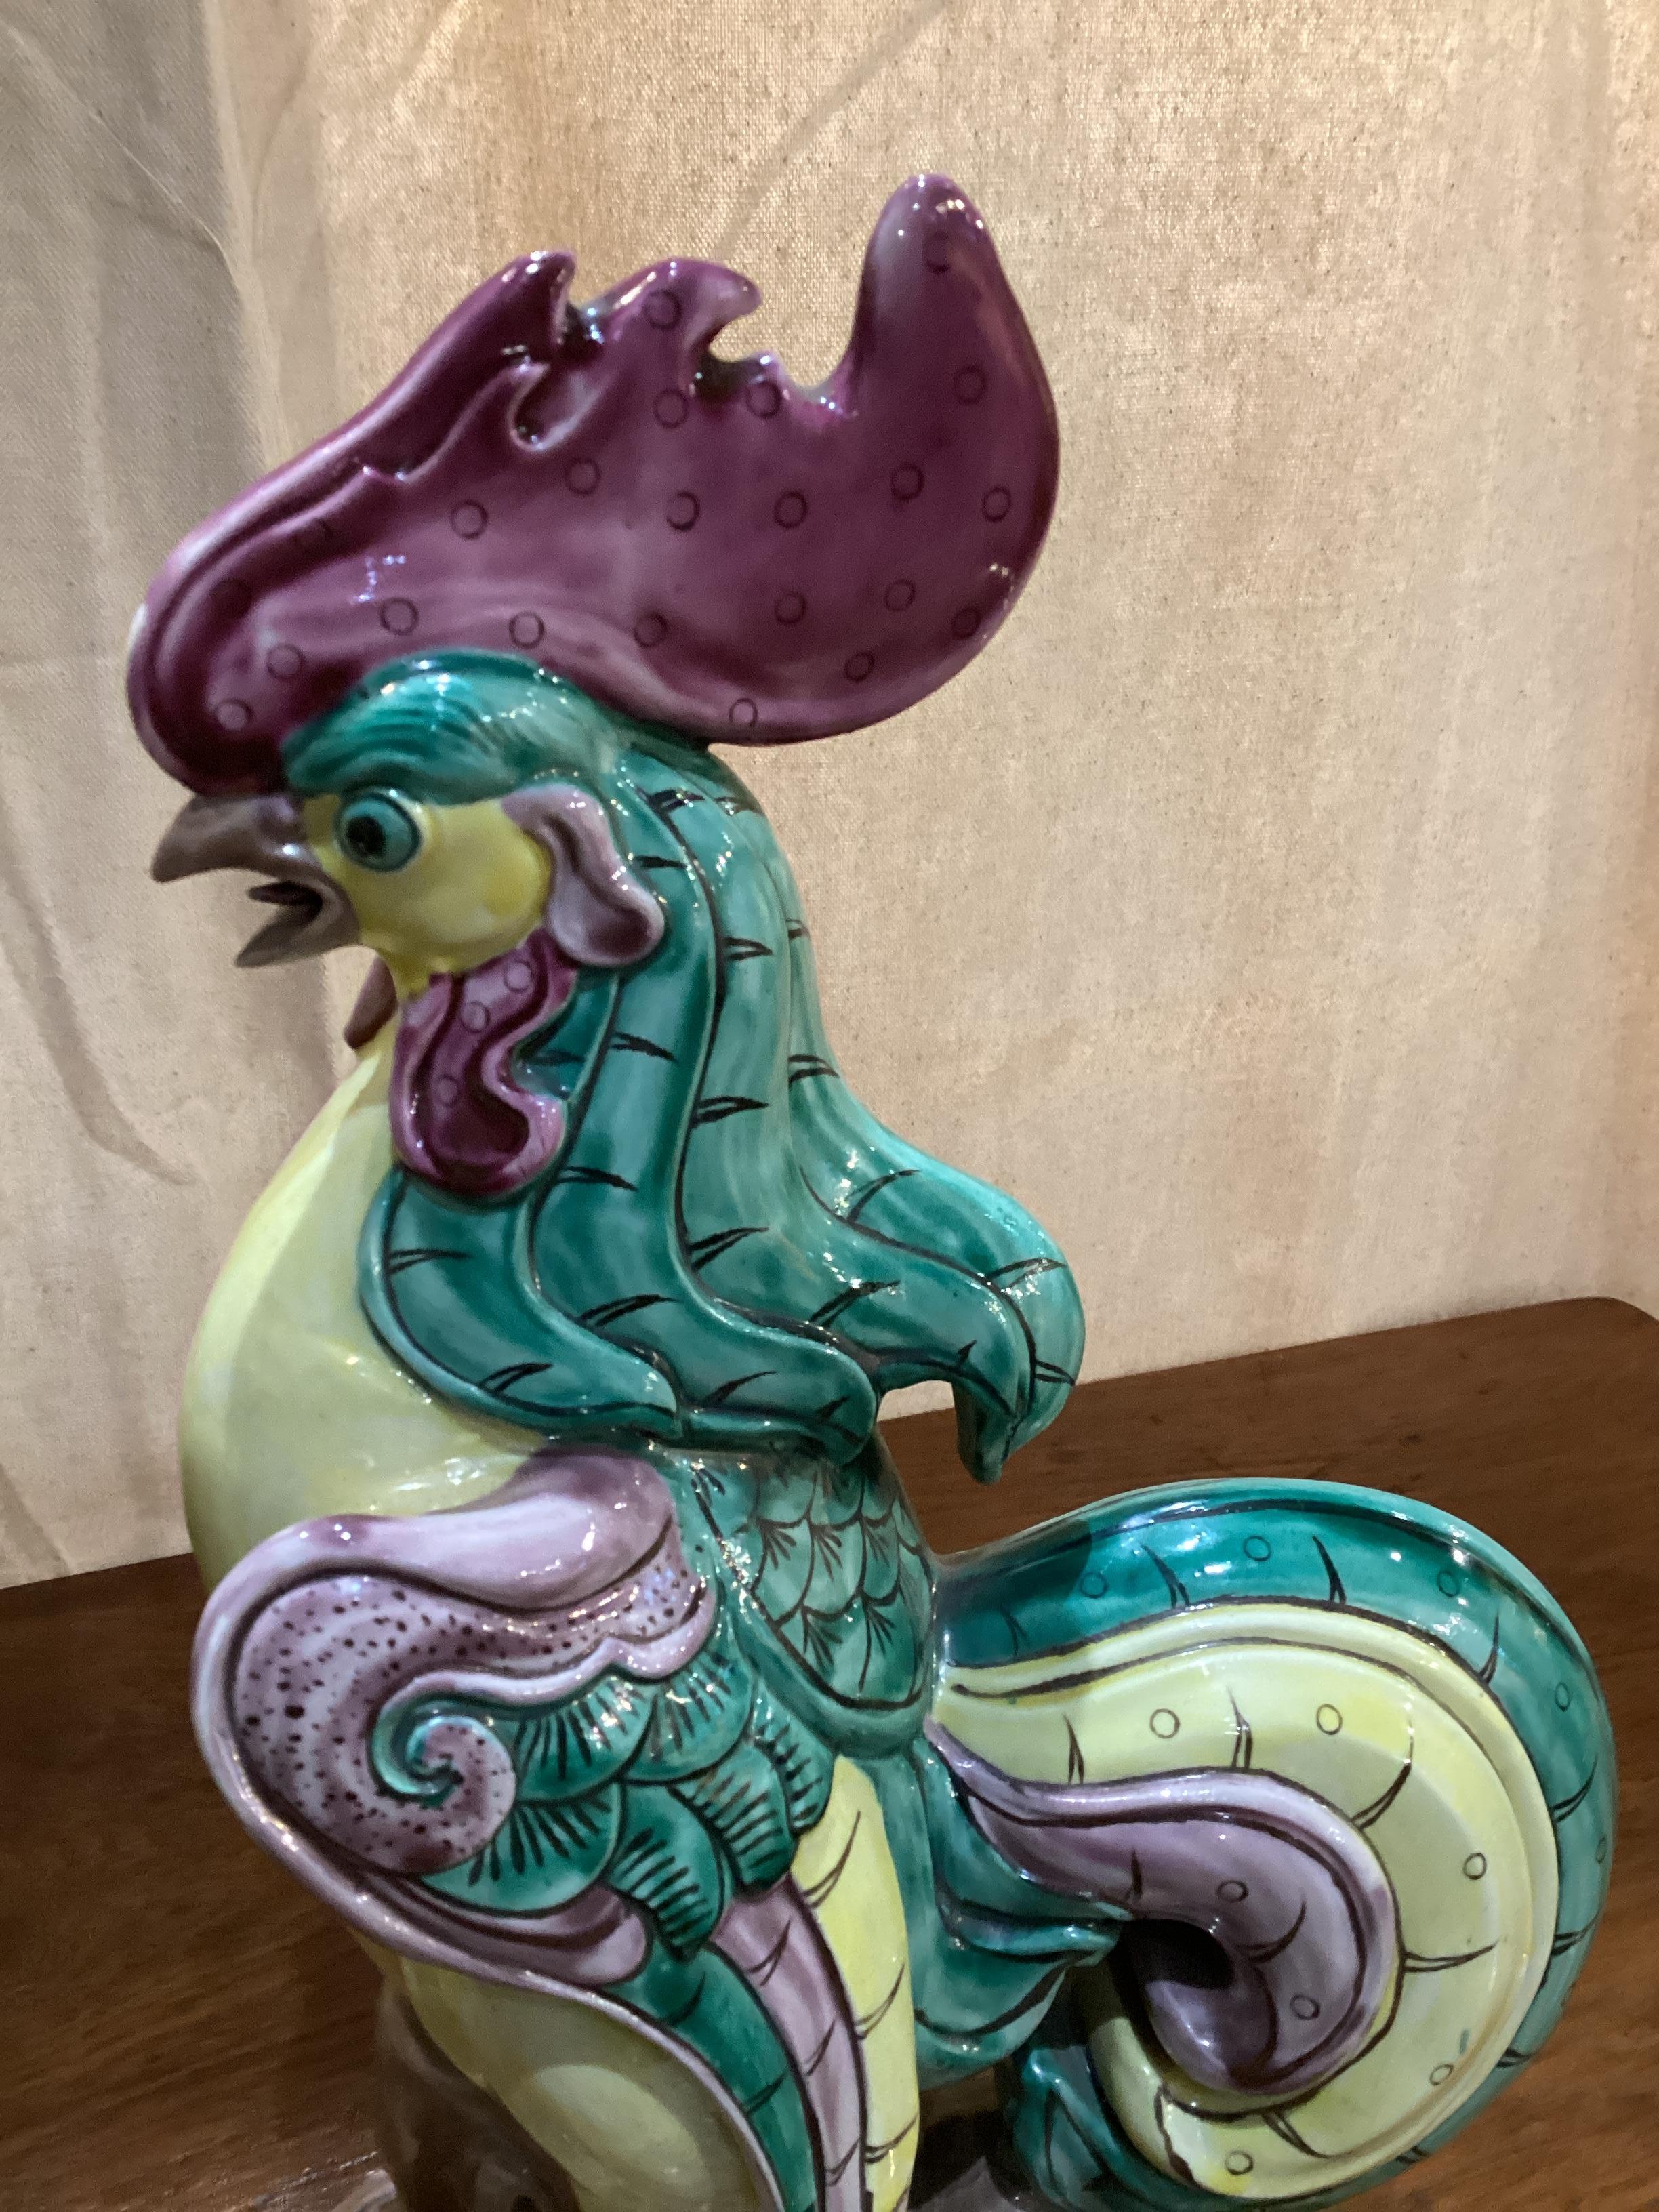 Pair of Vibrantly Colored Chinese Ceramic Roosters. Crowing roosters perched on a log in very colorful plumage of yellow, green and purple.